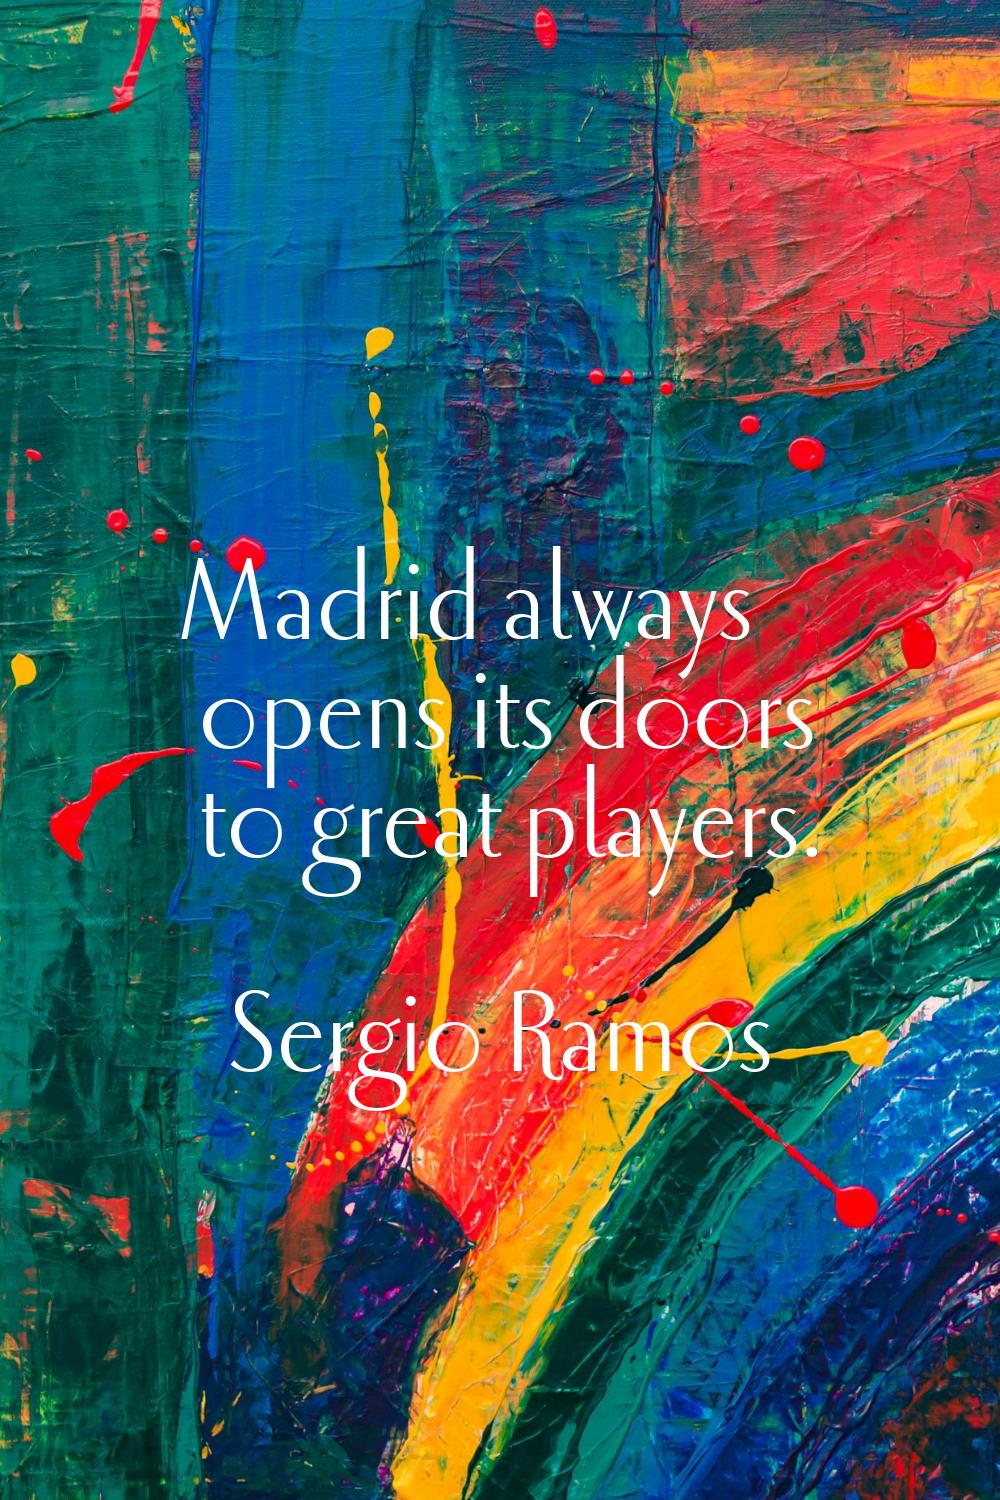 Madrid always opens its doors to great players.